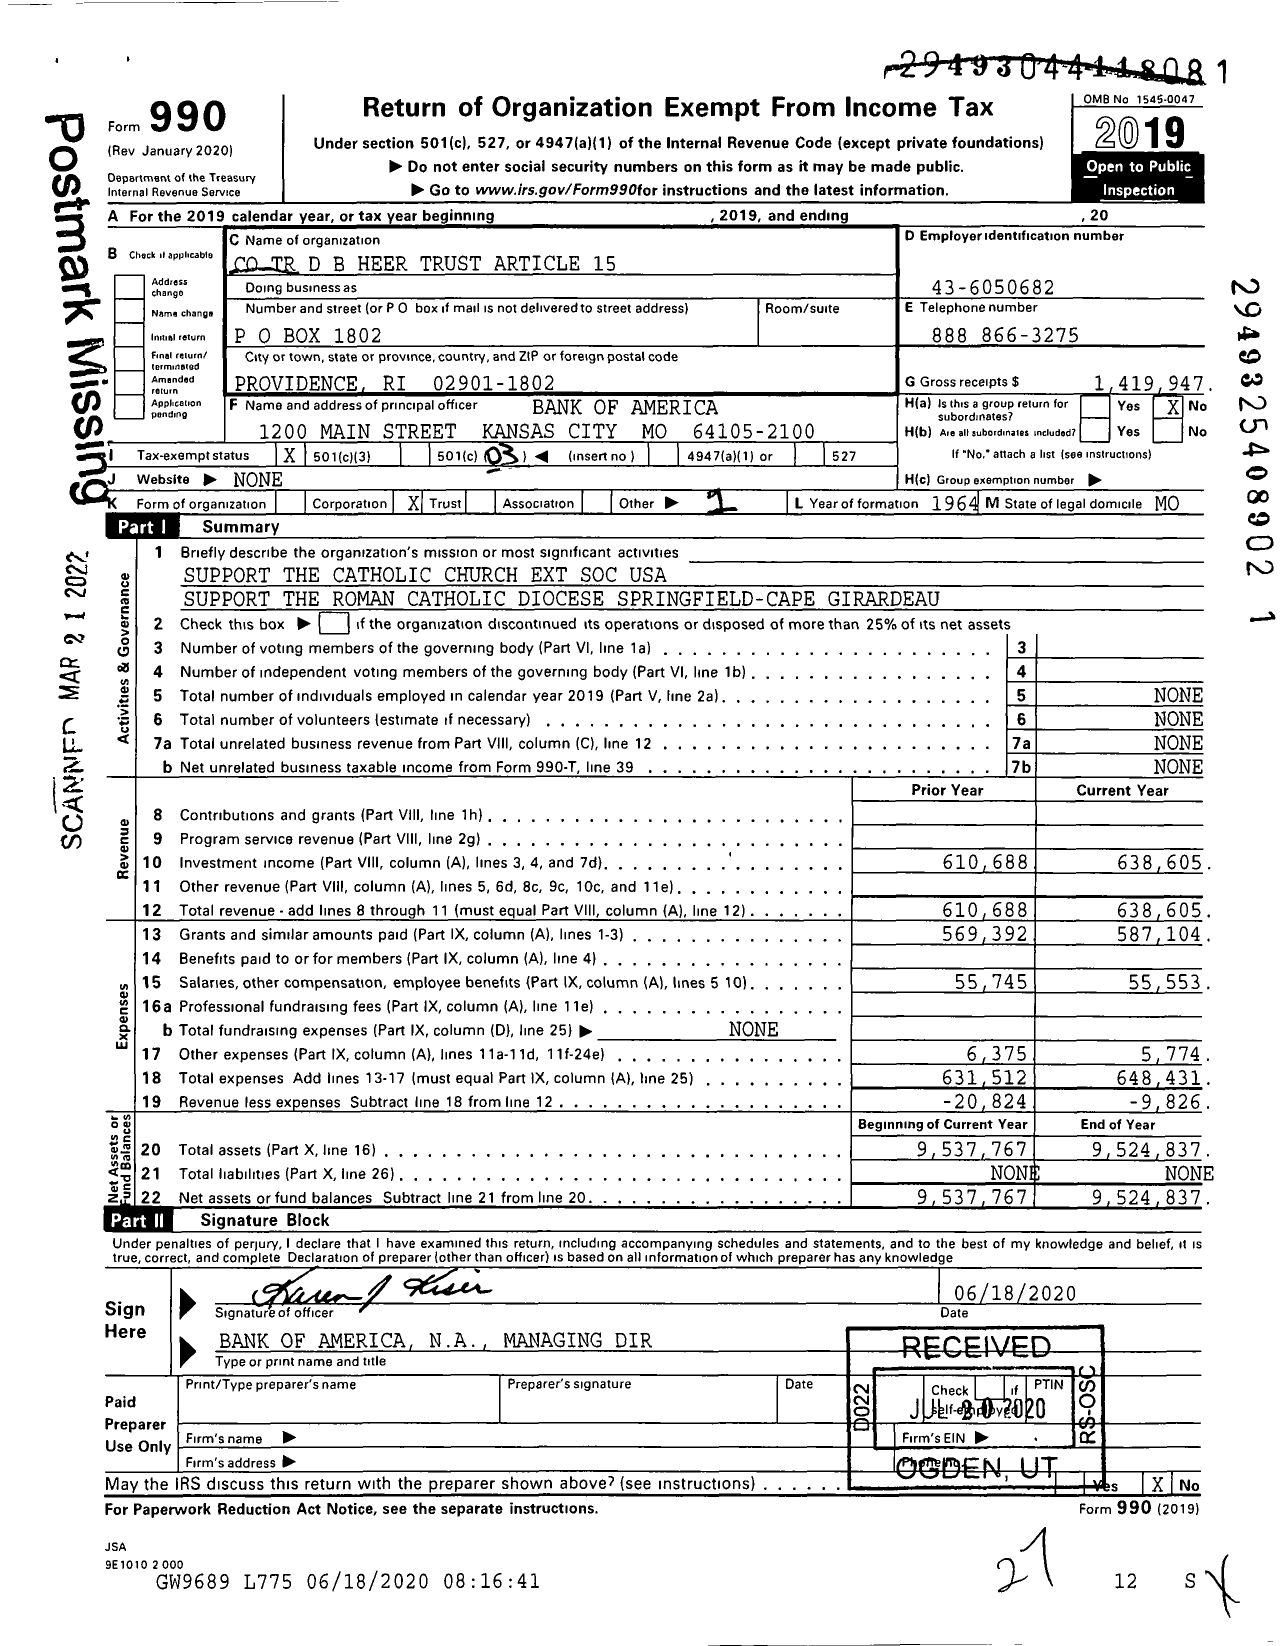 Image of first page of 2019 Form 990 for Dorsey B Heer TR 15 of Will